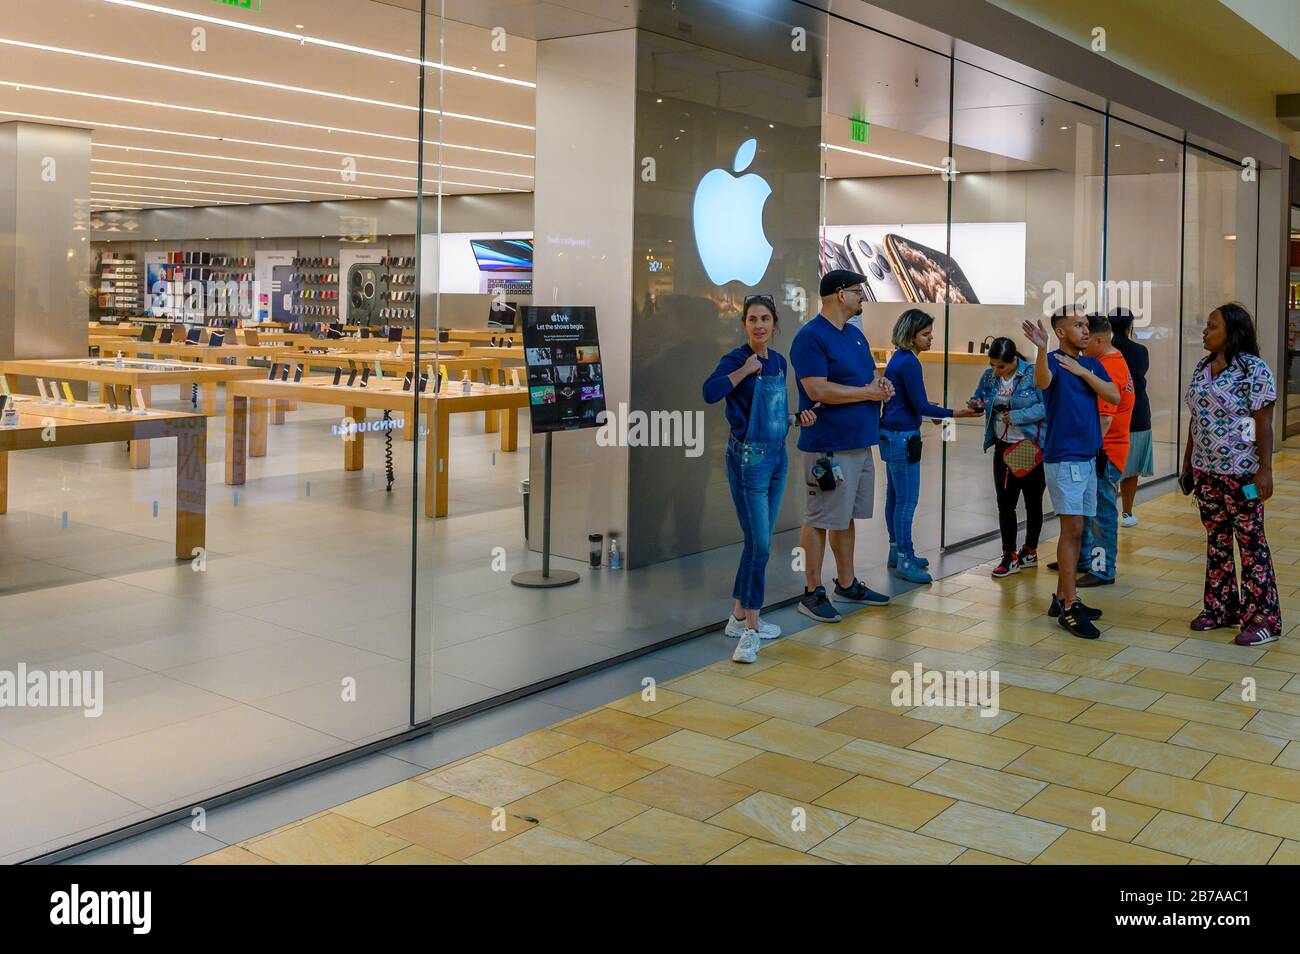 Houston, Texas, USA. 14th March 2020. View of the Apple Store in Houston, Texas  after the shut down of Apple Stores outside of China, Apple employees alerting customers of store shutdown due to Coronavirus on March 14, 2020. Houston, Texas. Stock Photo